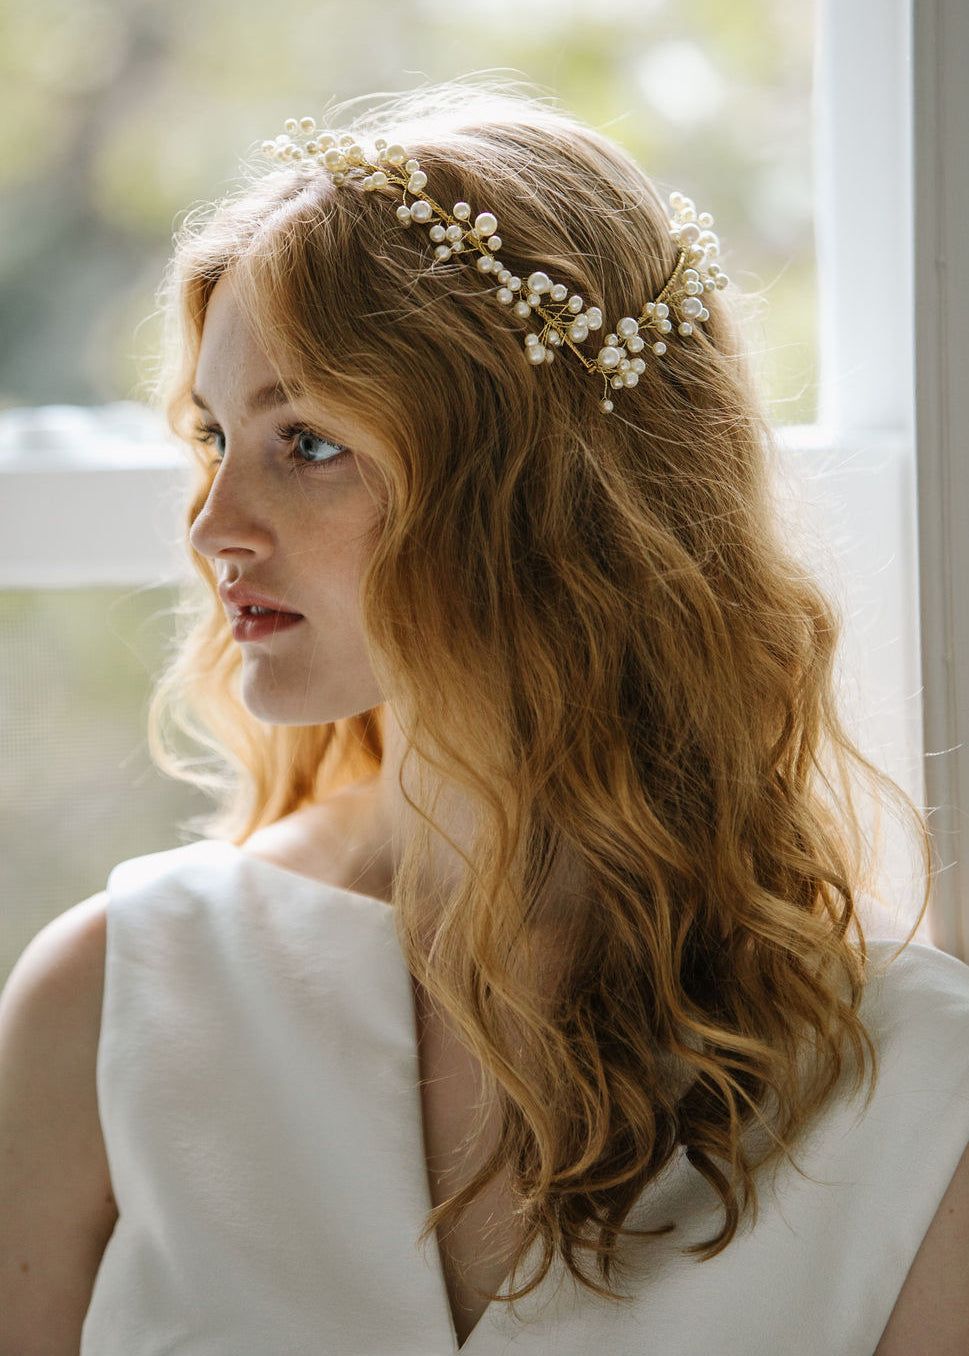 Forget Floral Cos These Braided Hair Accessories Are Worth Drooling Over! |  WeddingBazaar